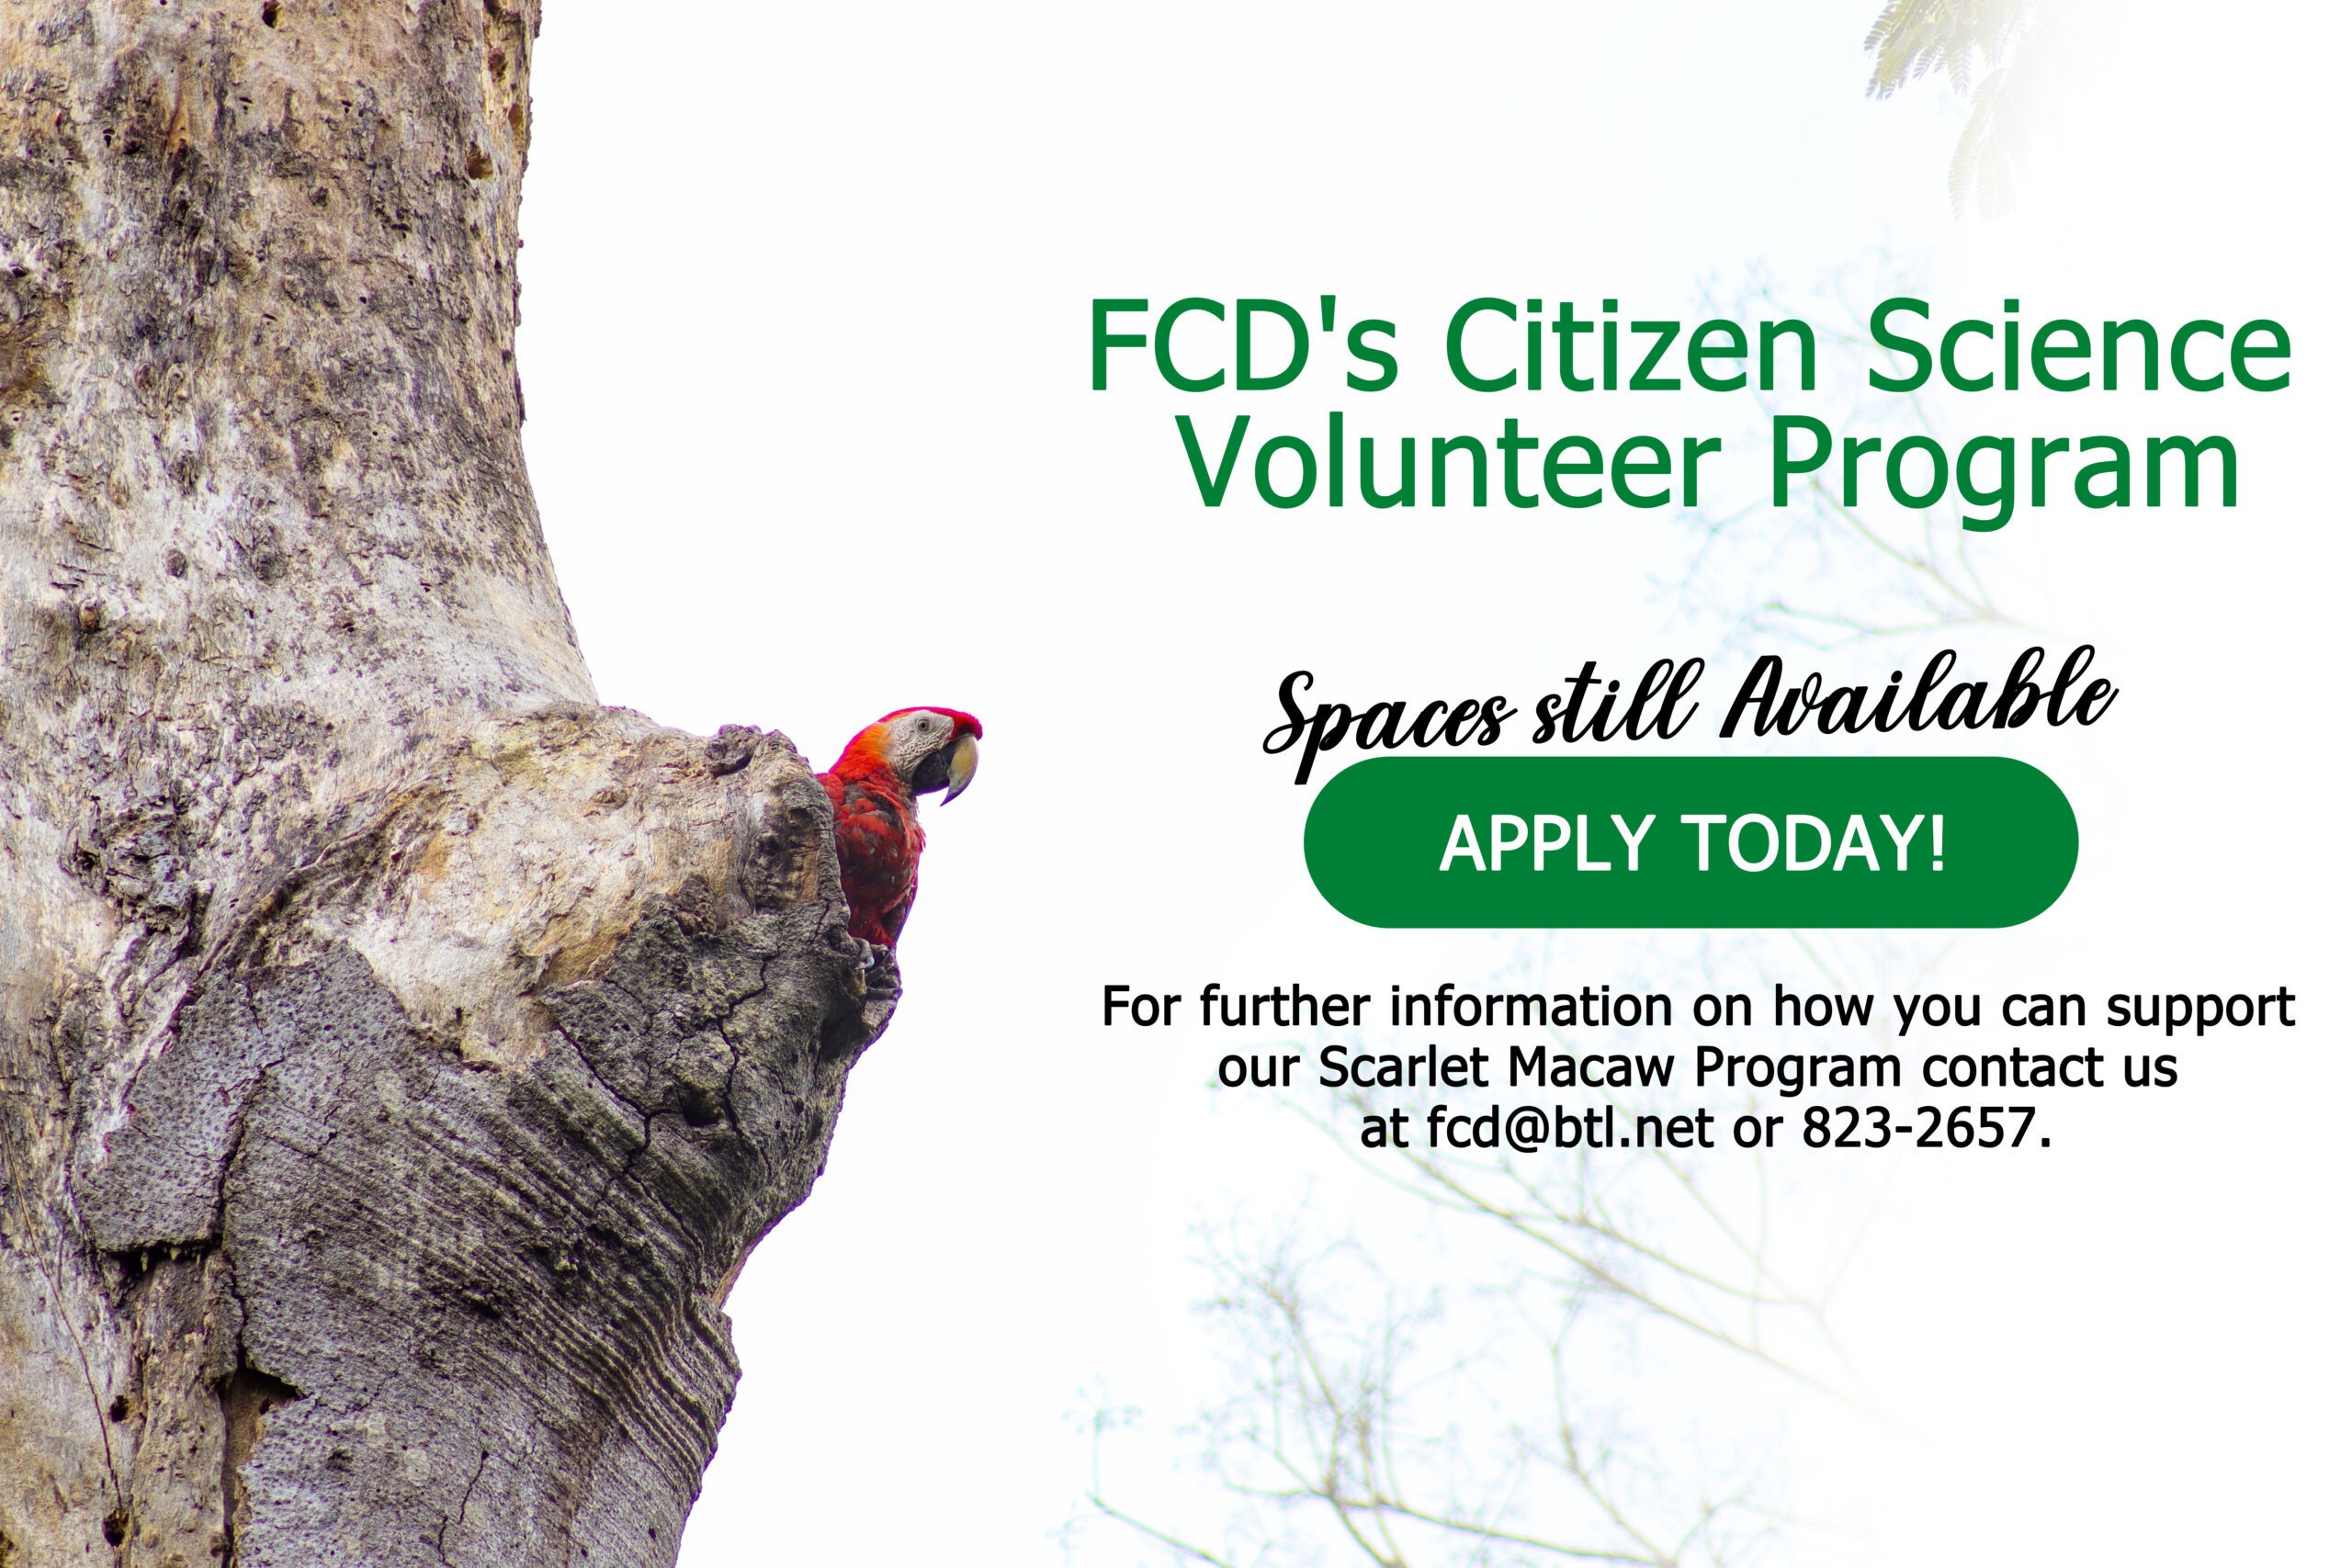 Join as a volunteer with FCD’s Citizen Science Program.